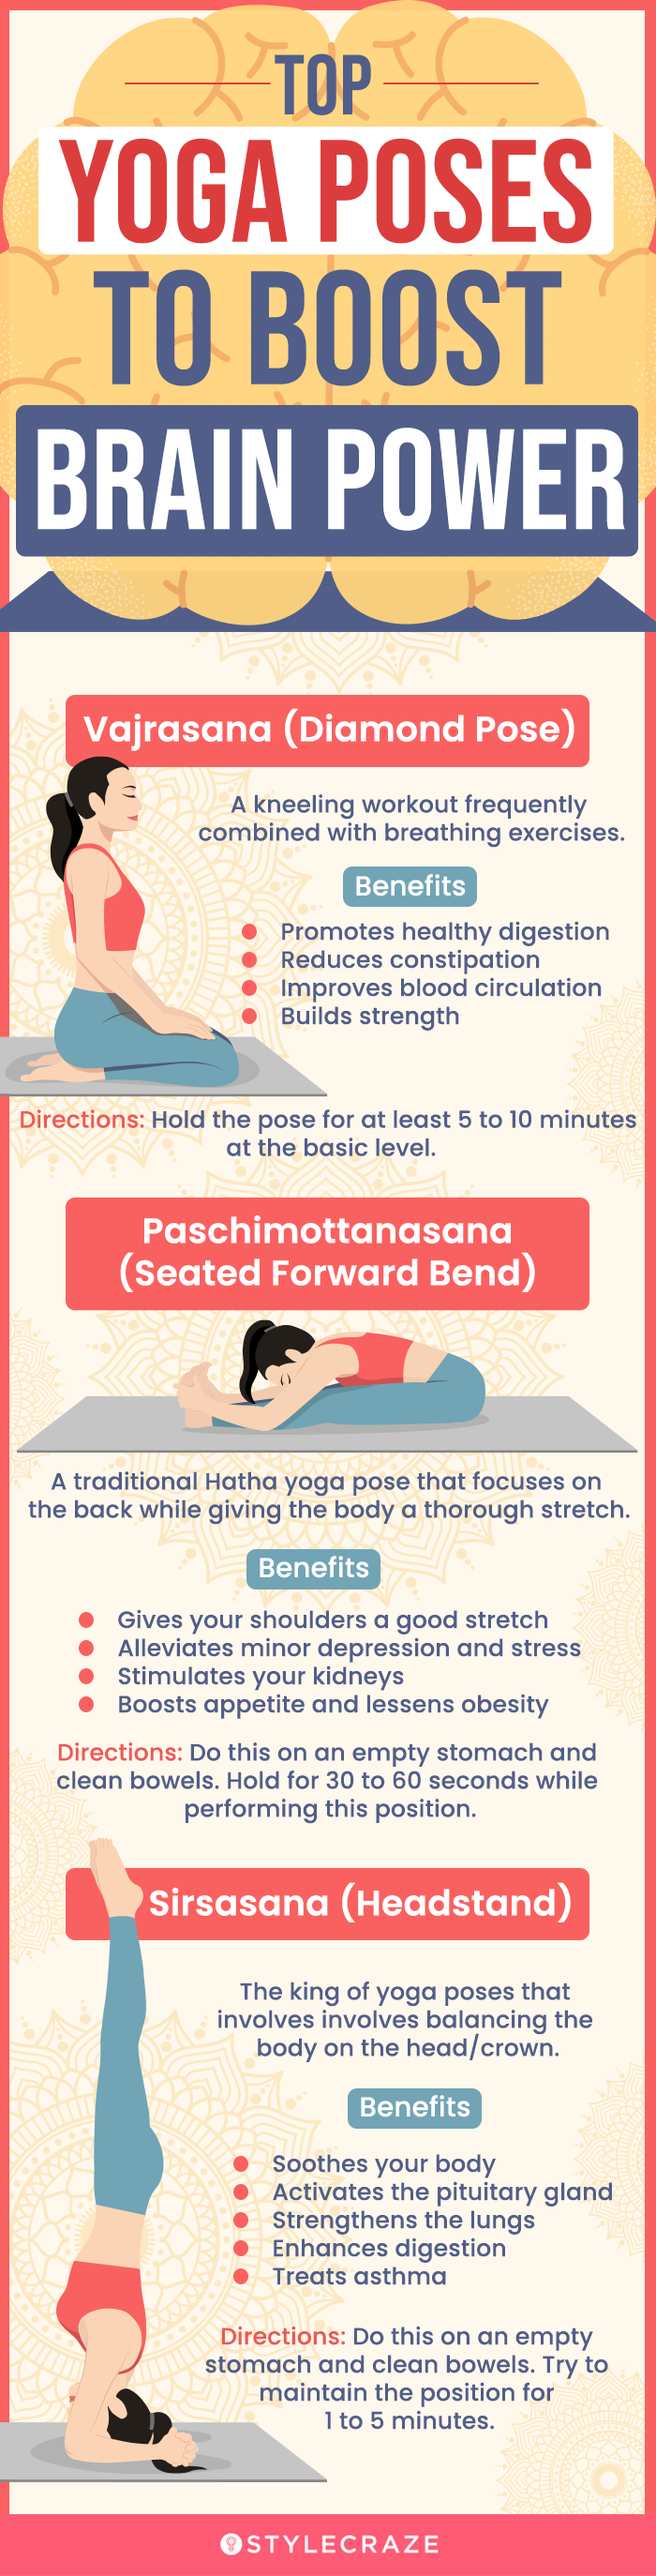 top yoga poses to boost brain power (infographic)